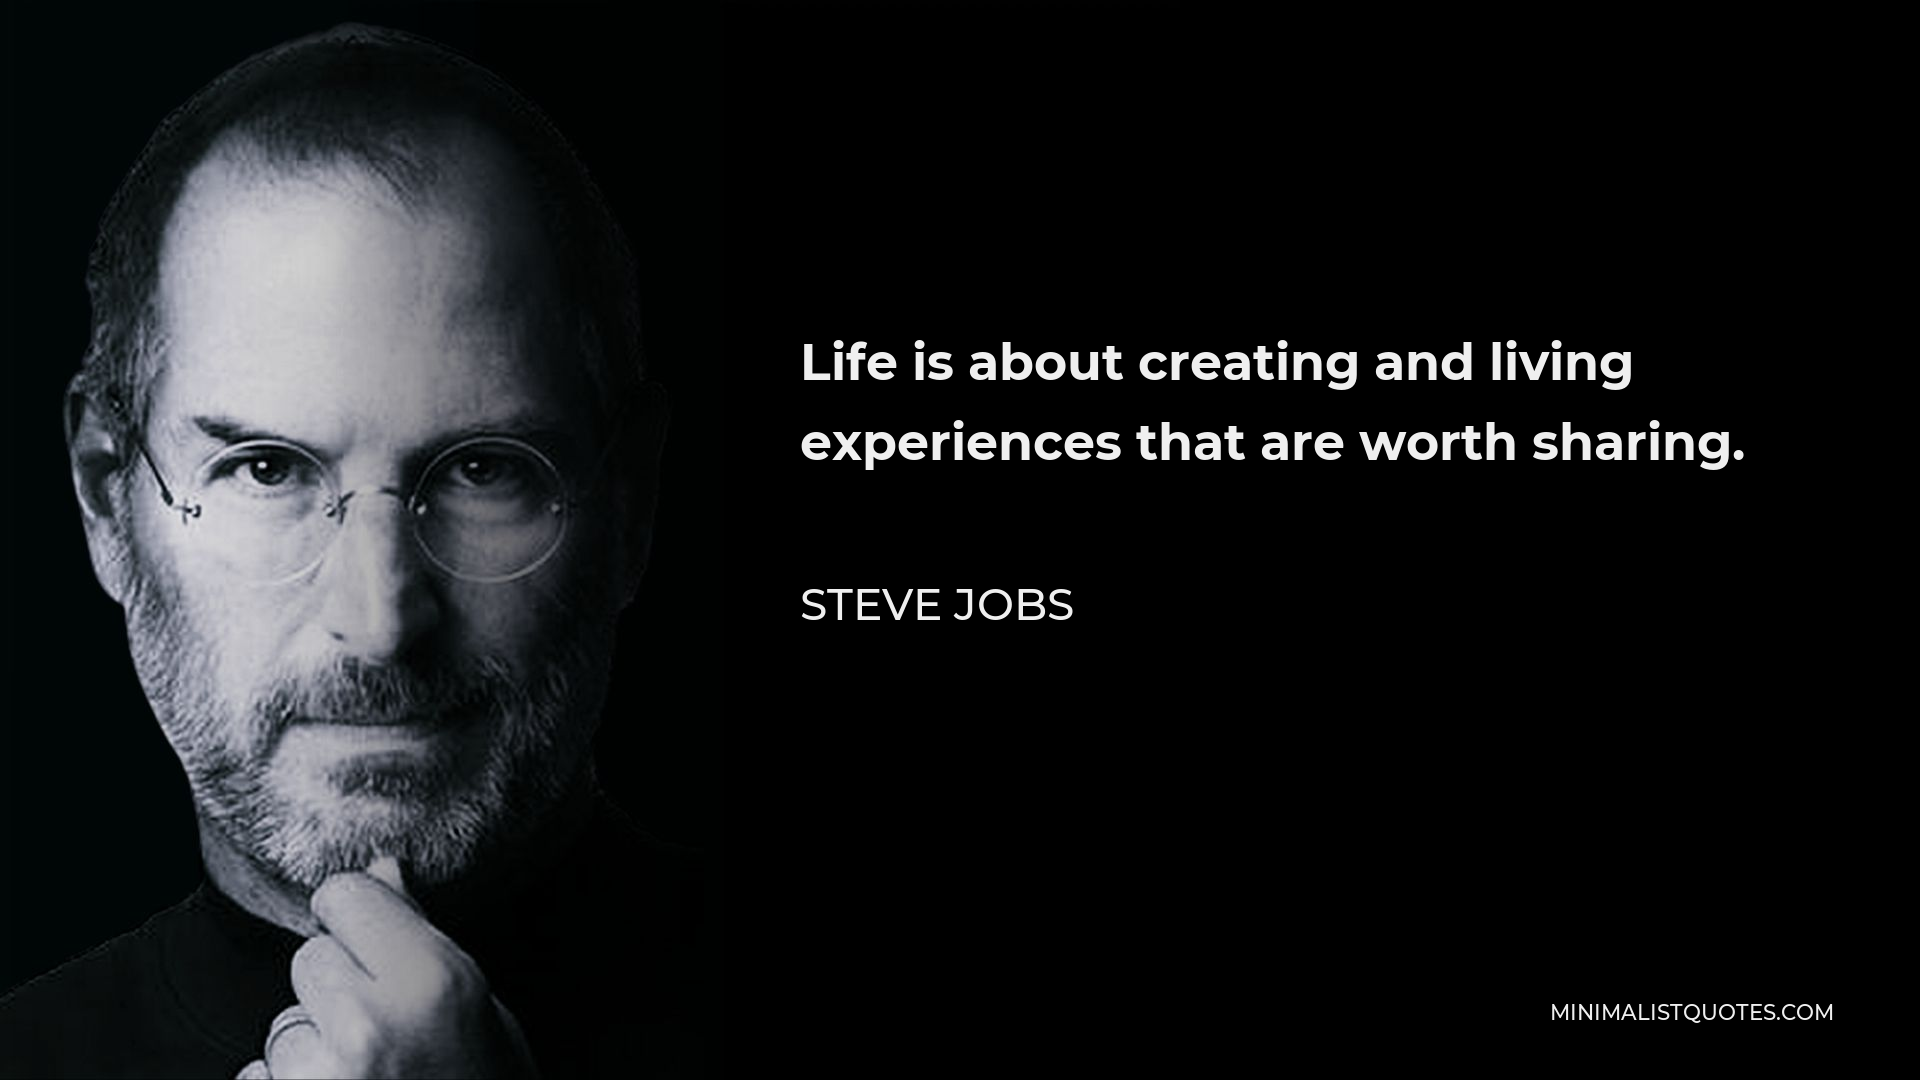 Steve Jobs Quote - Life is about creating and living experiences that are worth sharing.